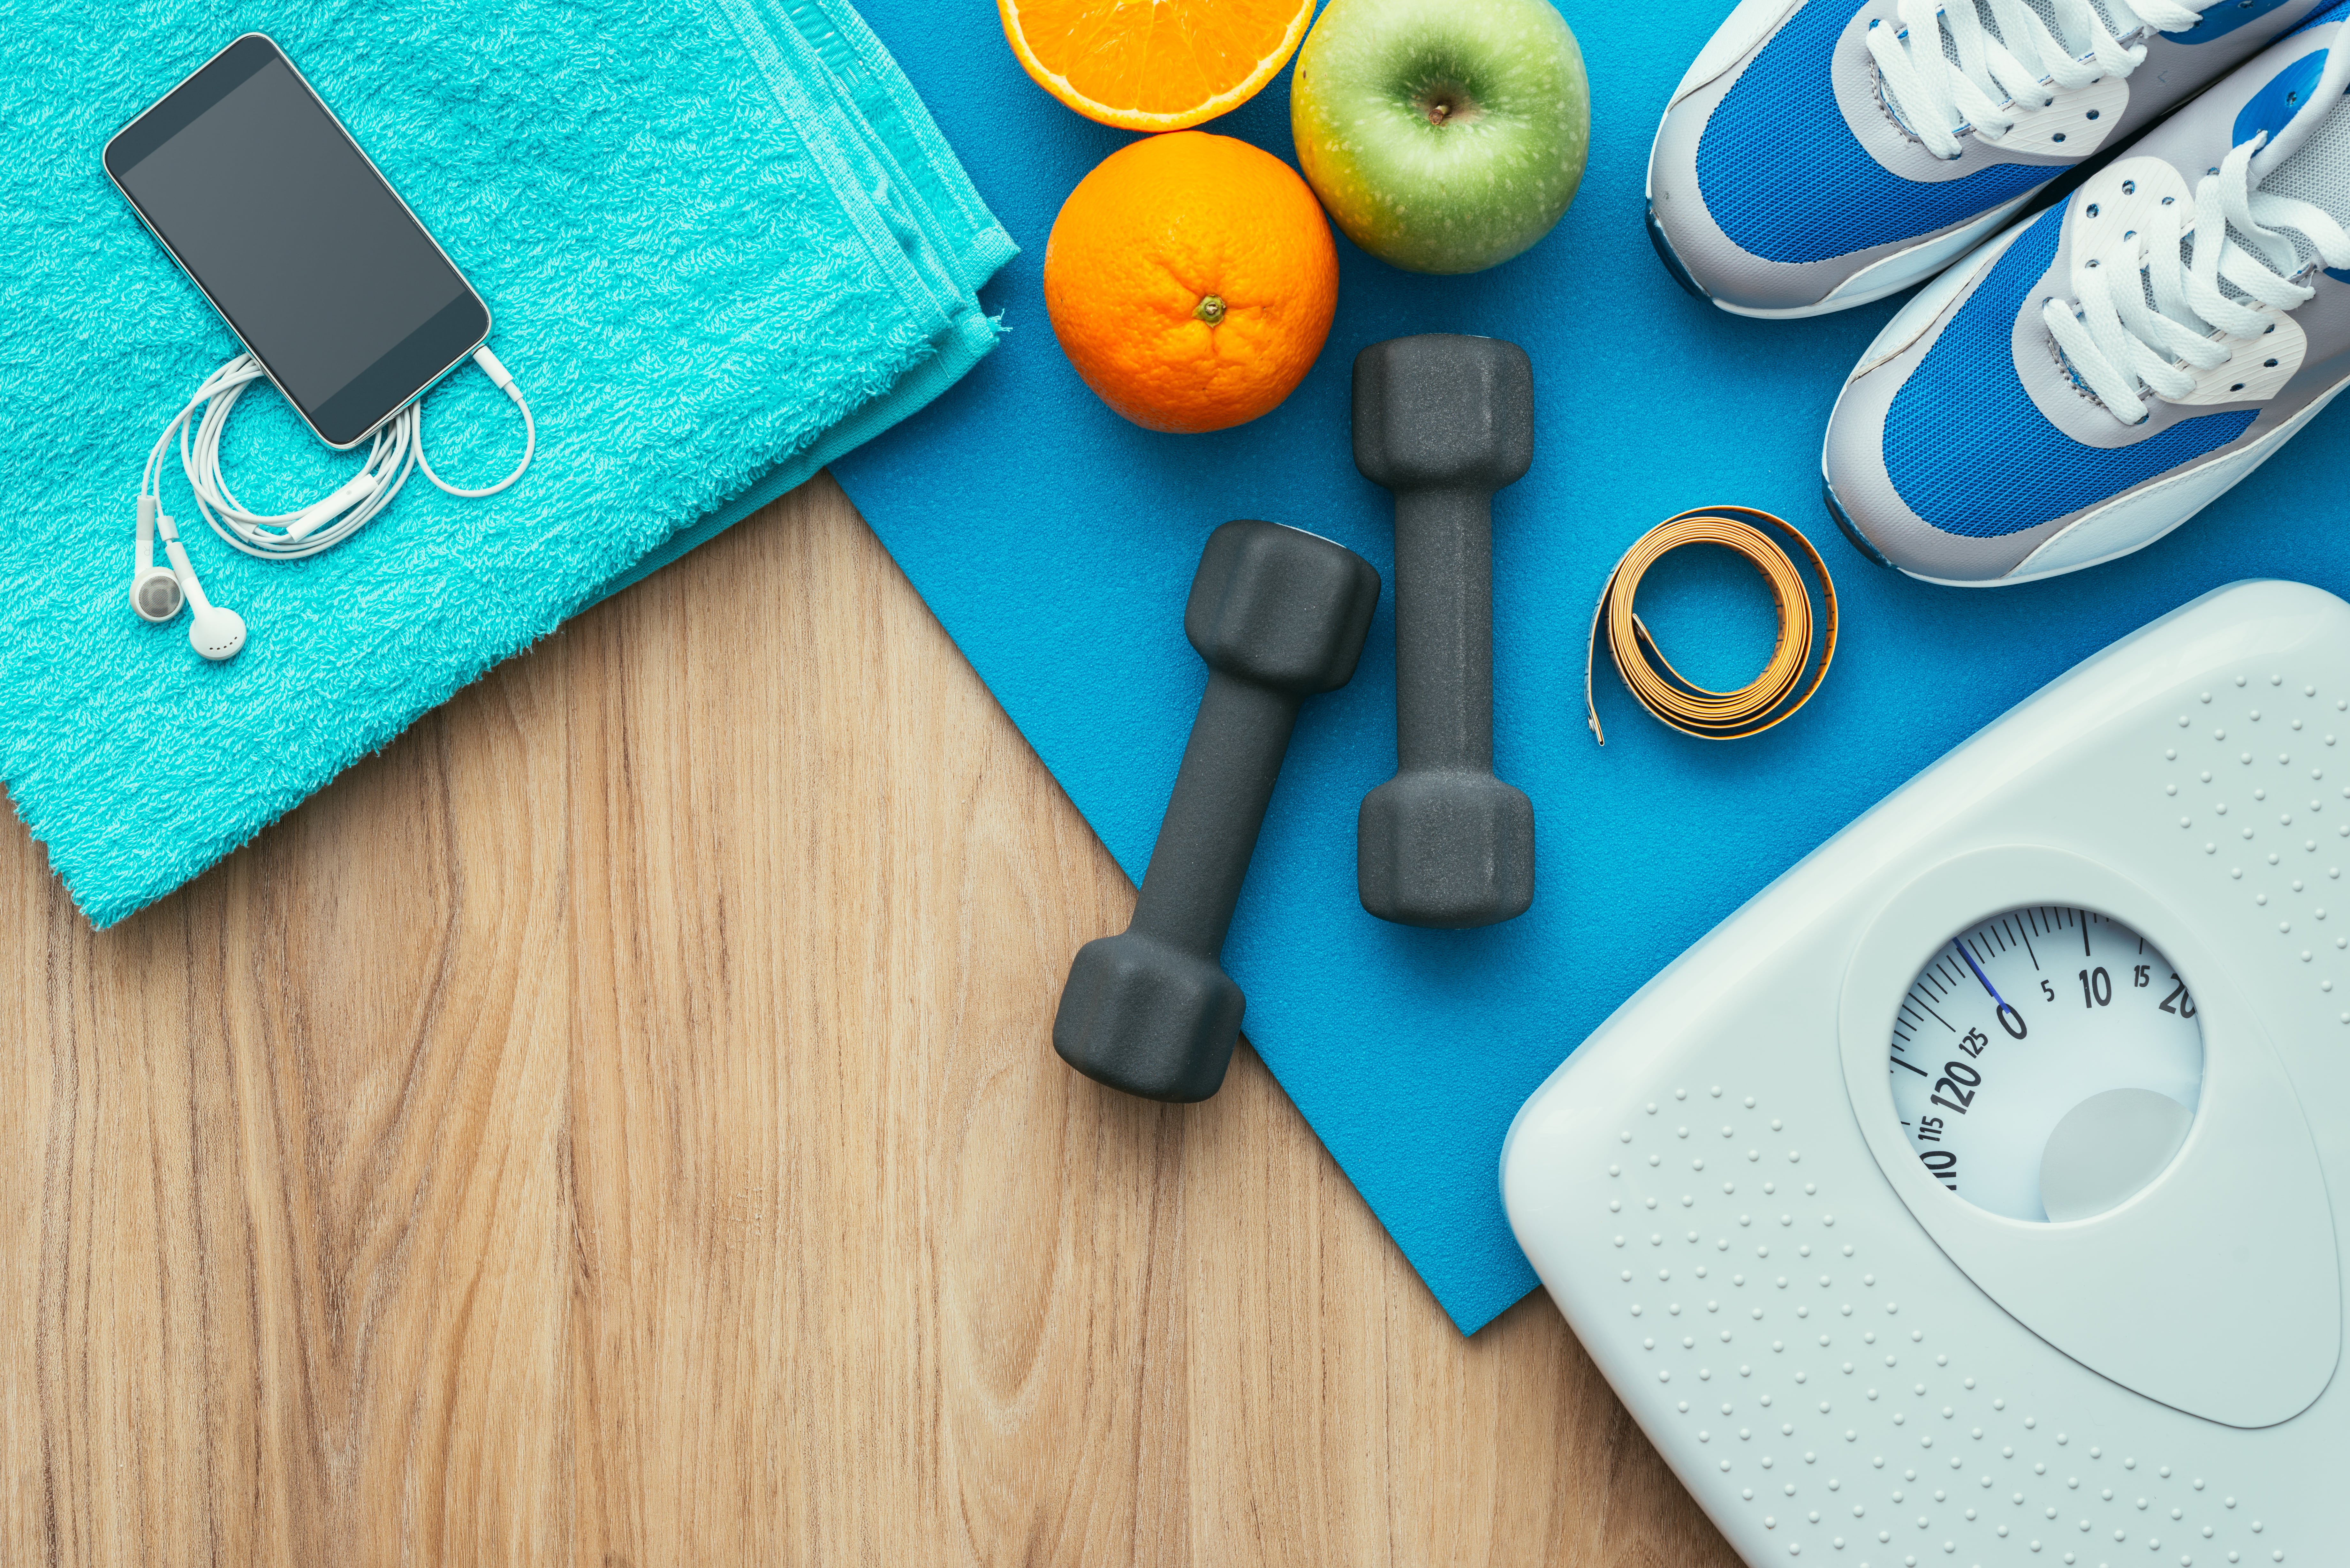 Sports and workout equipment on a wooden floor with healthy snacks, weight loss and physical activity concept